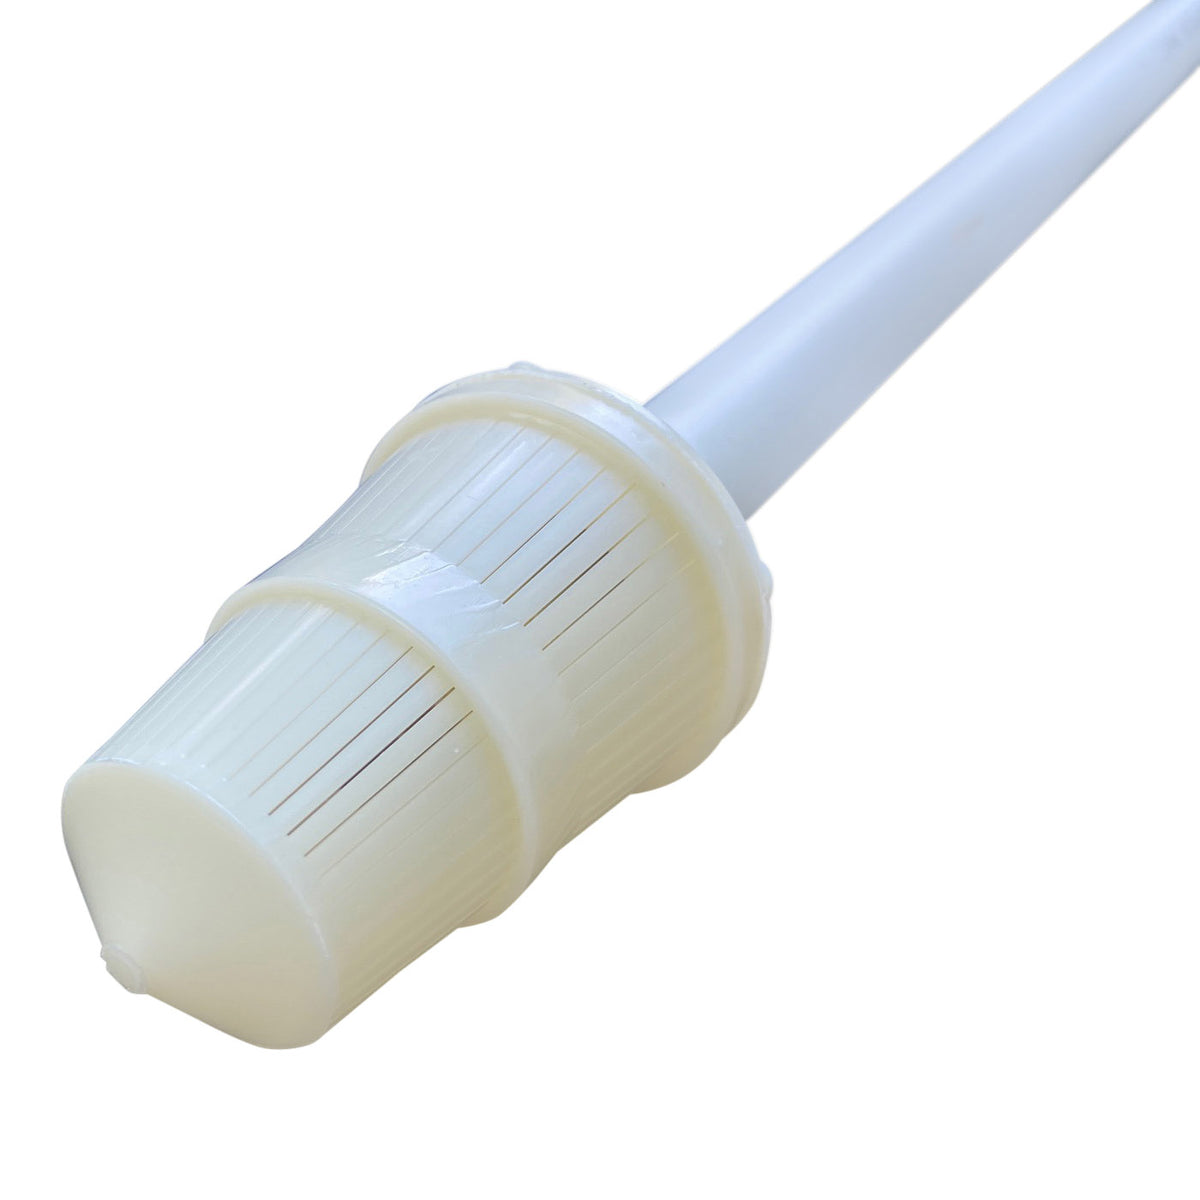 HUM Water Filtration Riser Tube Filter Cone